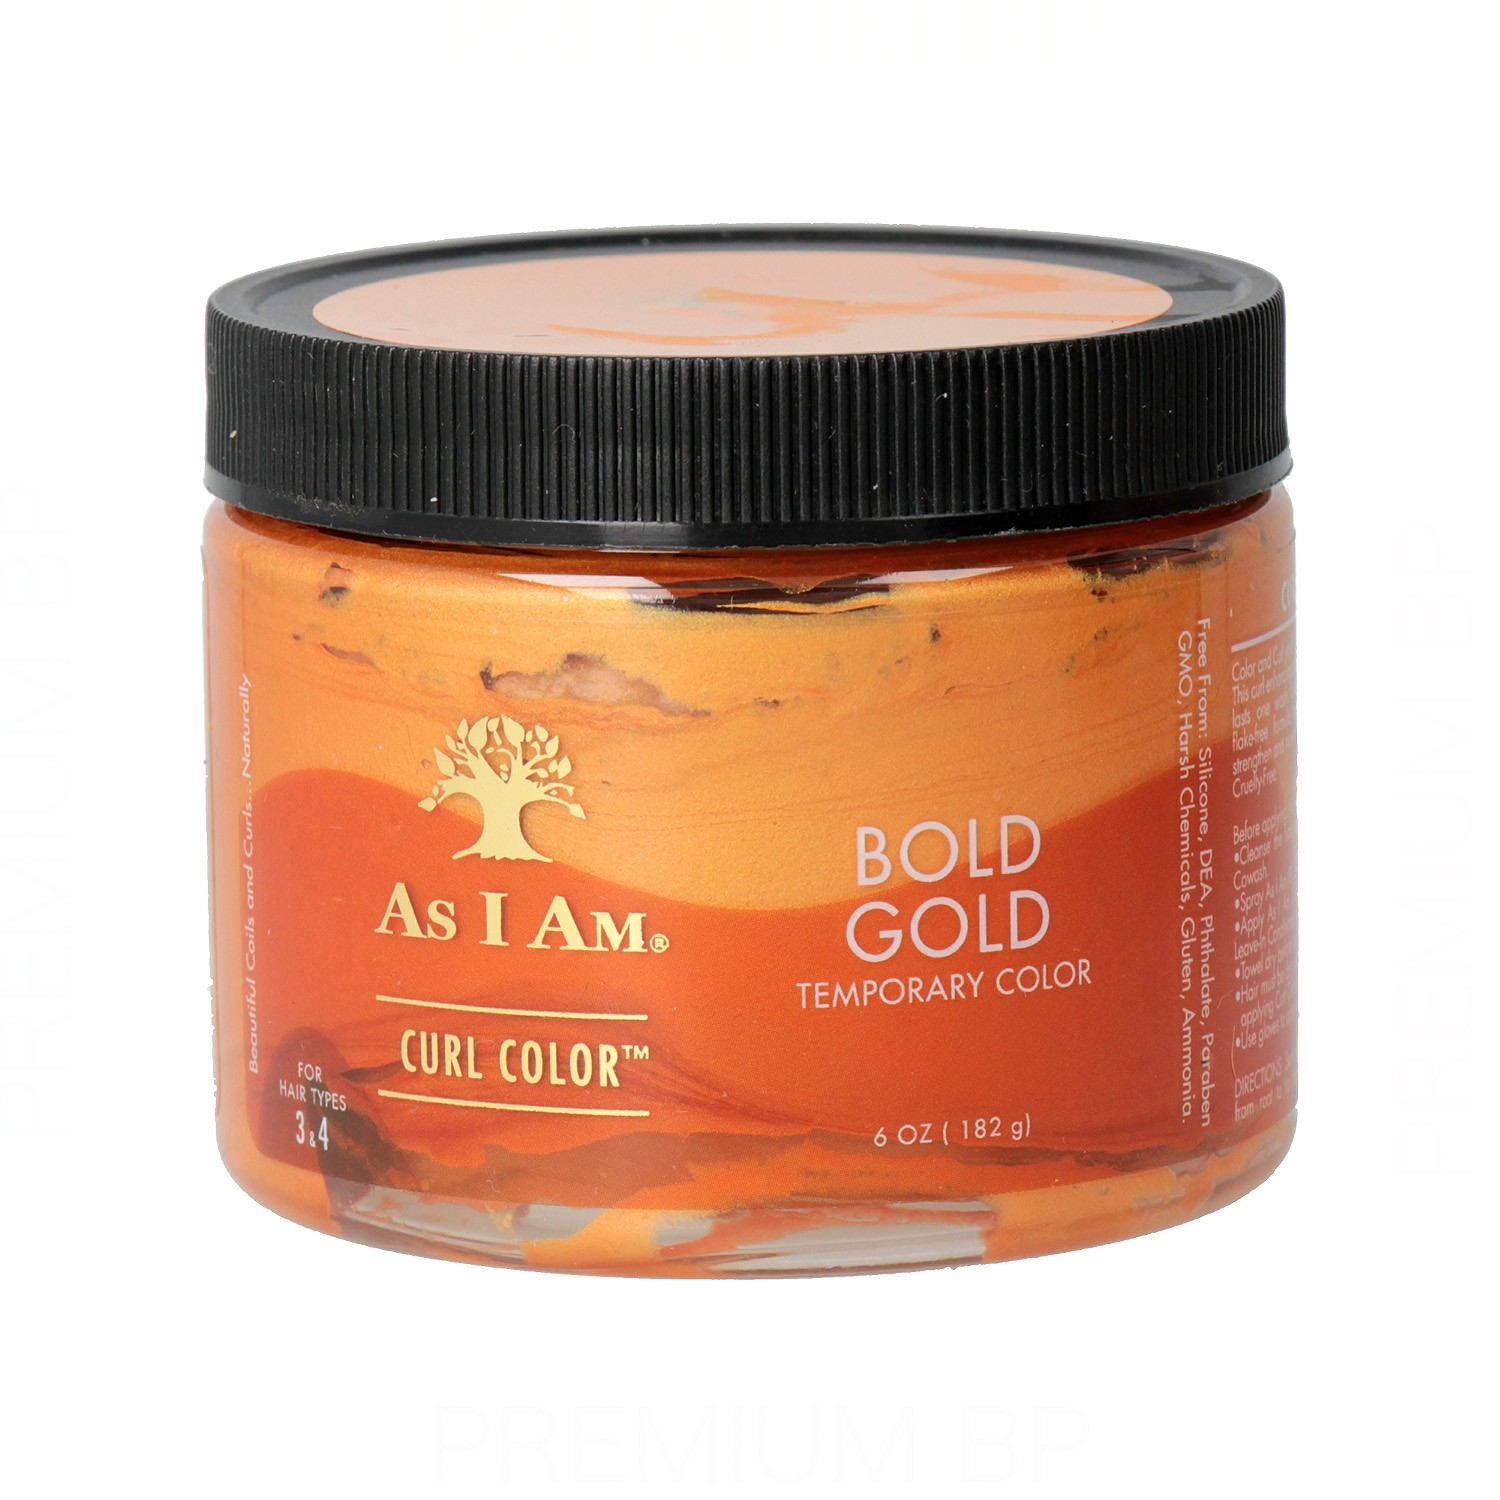 As I Am Curl Color Temporary Color Tint Bold Gold 182 g